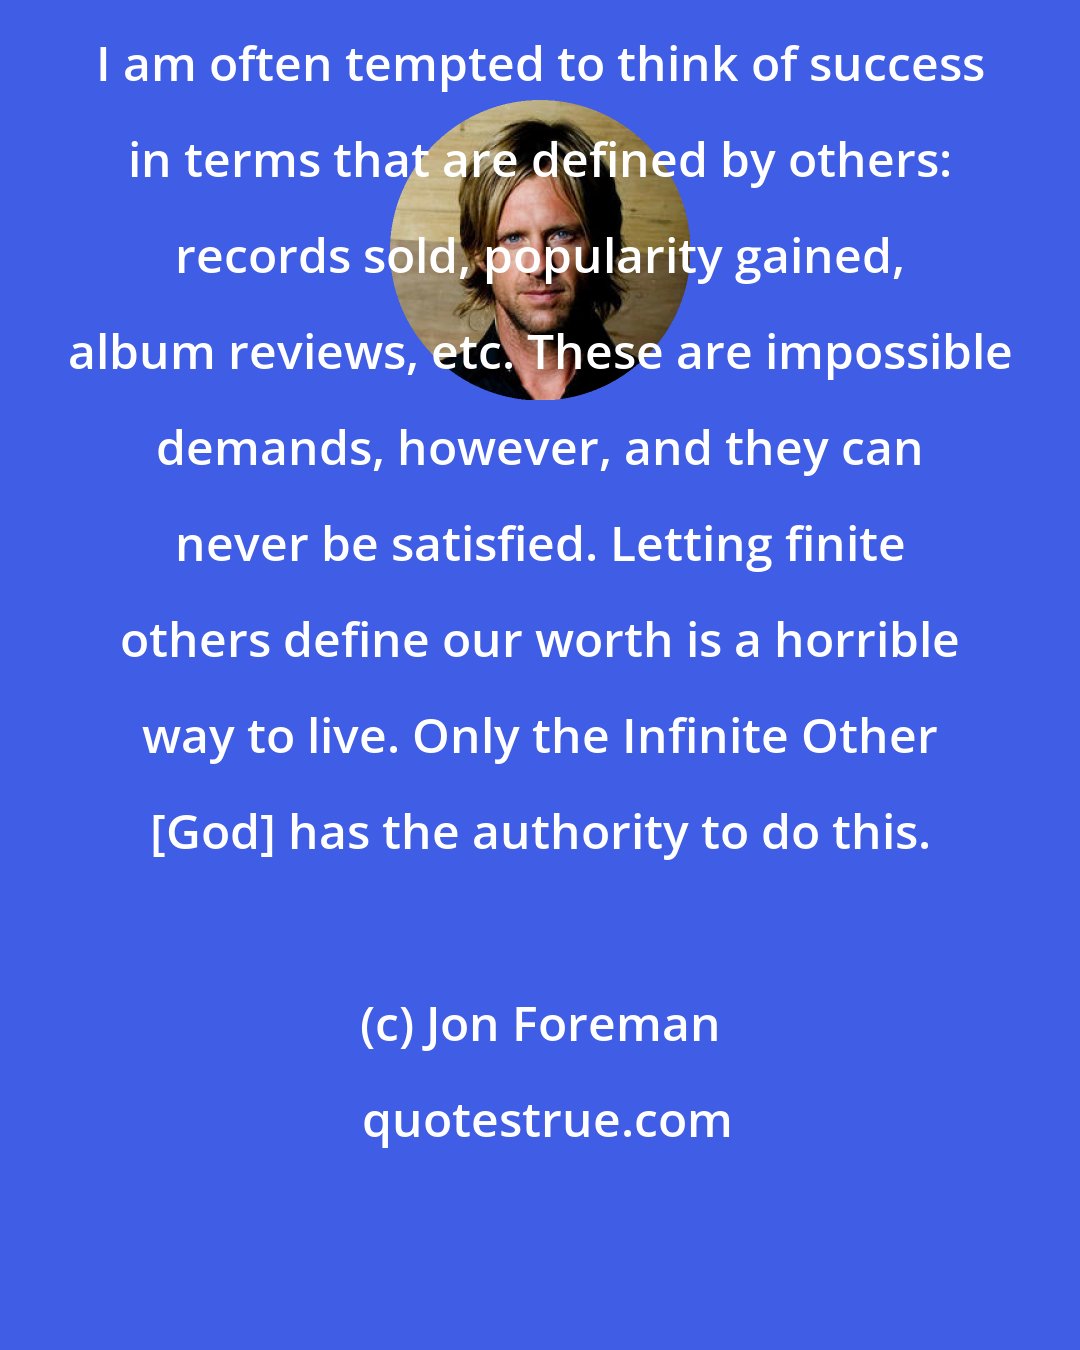 Jon Foreman: I am often tempted to think of success in terms that are defined by others: records sold, popularity gained, album reviews, etc. These are impossible demands, however, and they can never be satisfied. Letting finite others define our worth is a horrible way to live. Only the Infinite Other [God] has the authority to do this.